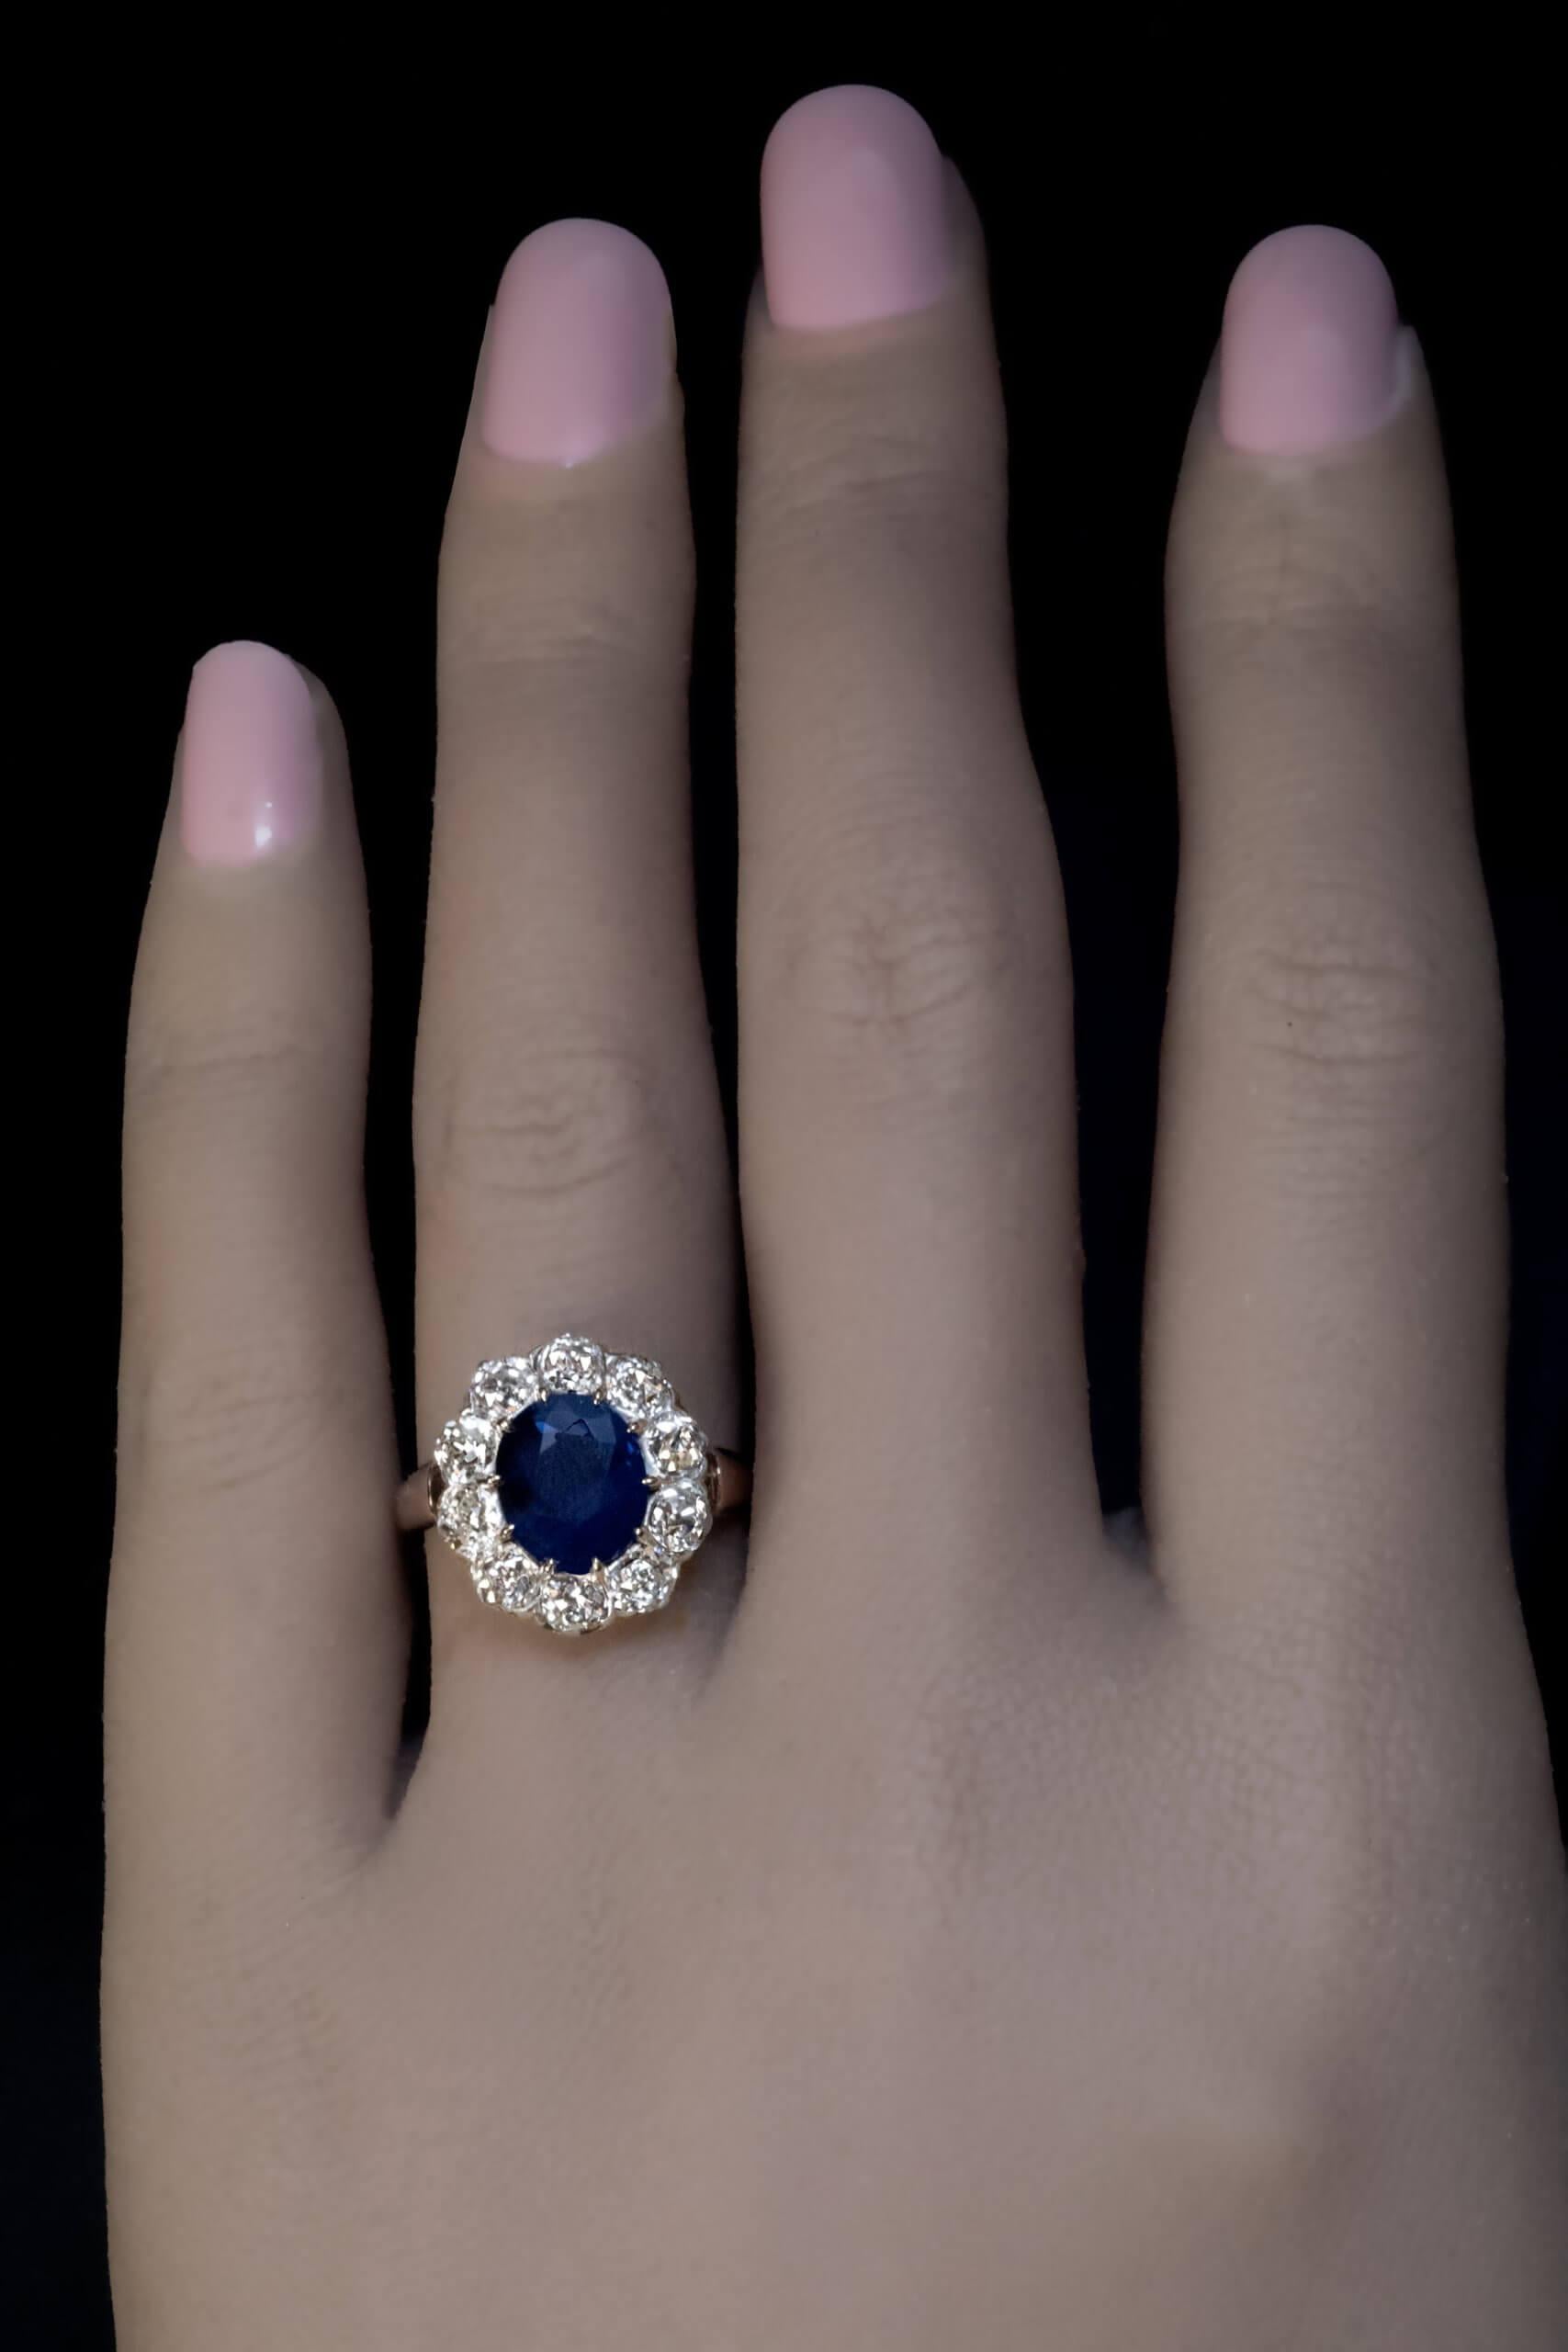 Circa 1910  This classic cluster ring is crafted in gold and platinum. The ring features a 2.11 carat natural unheated Thai sapphire of a medium blue color. The sapphire is surrounded by chunky old mine cut diamonds (VS1-VS2 clarity, average – K